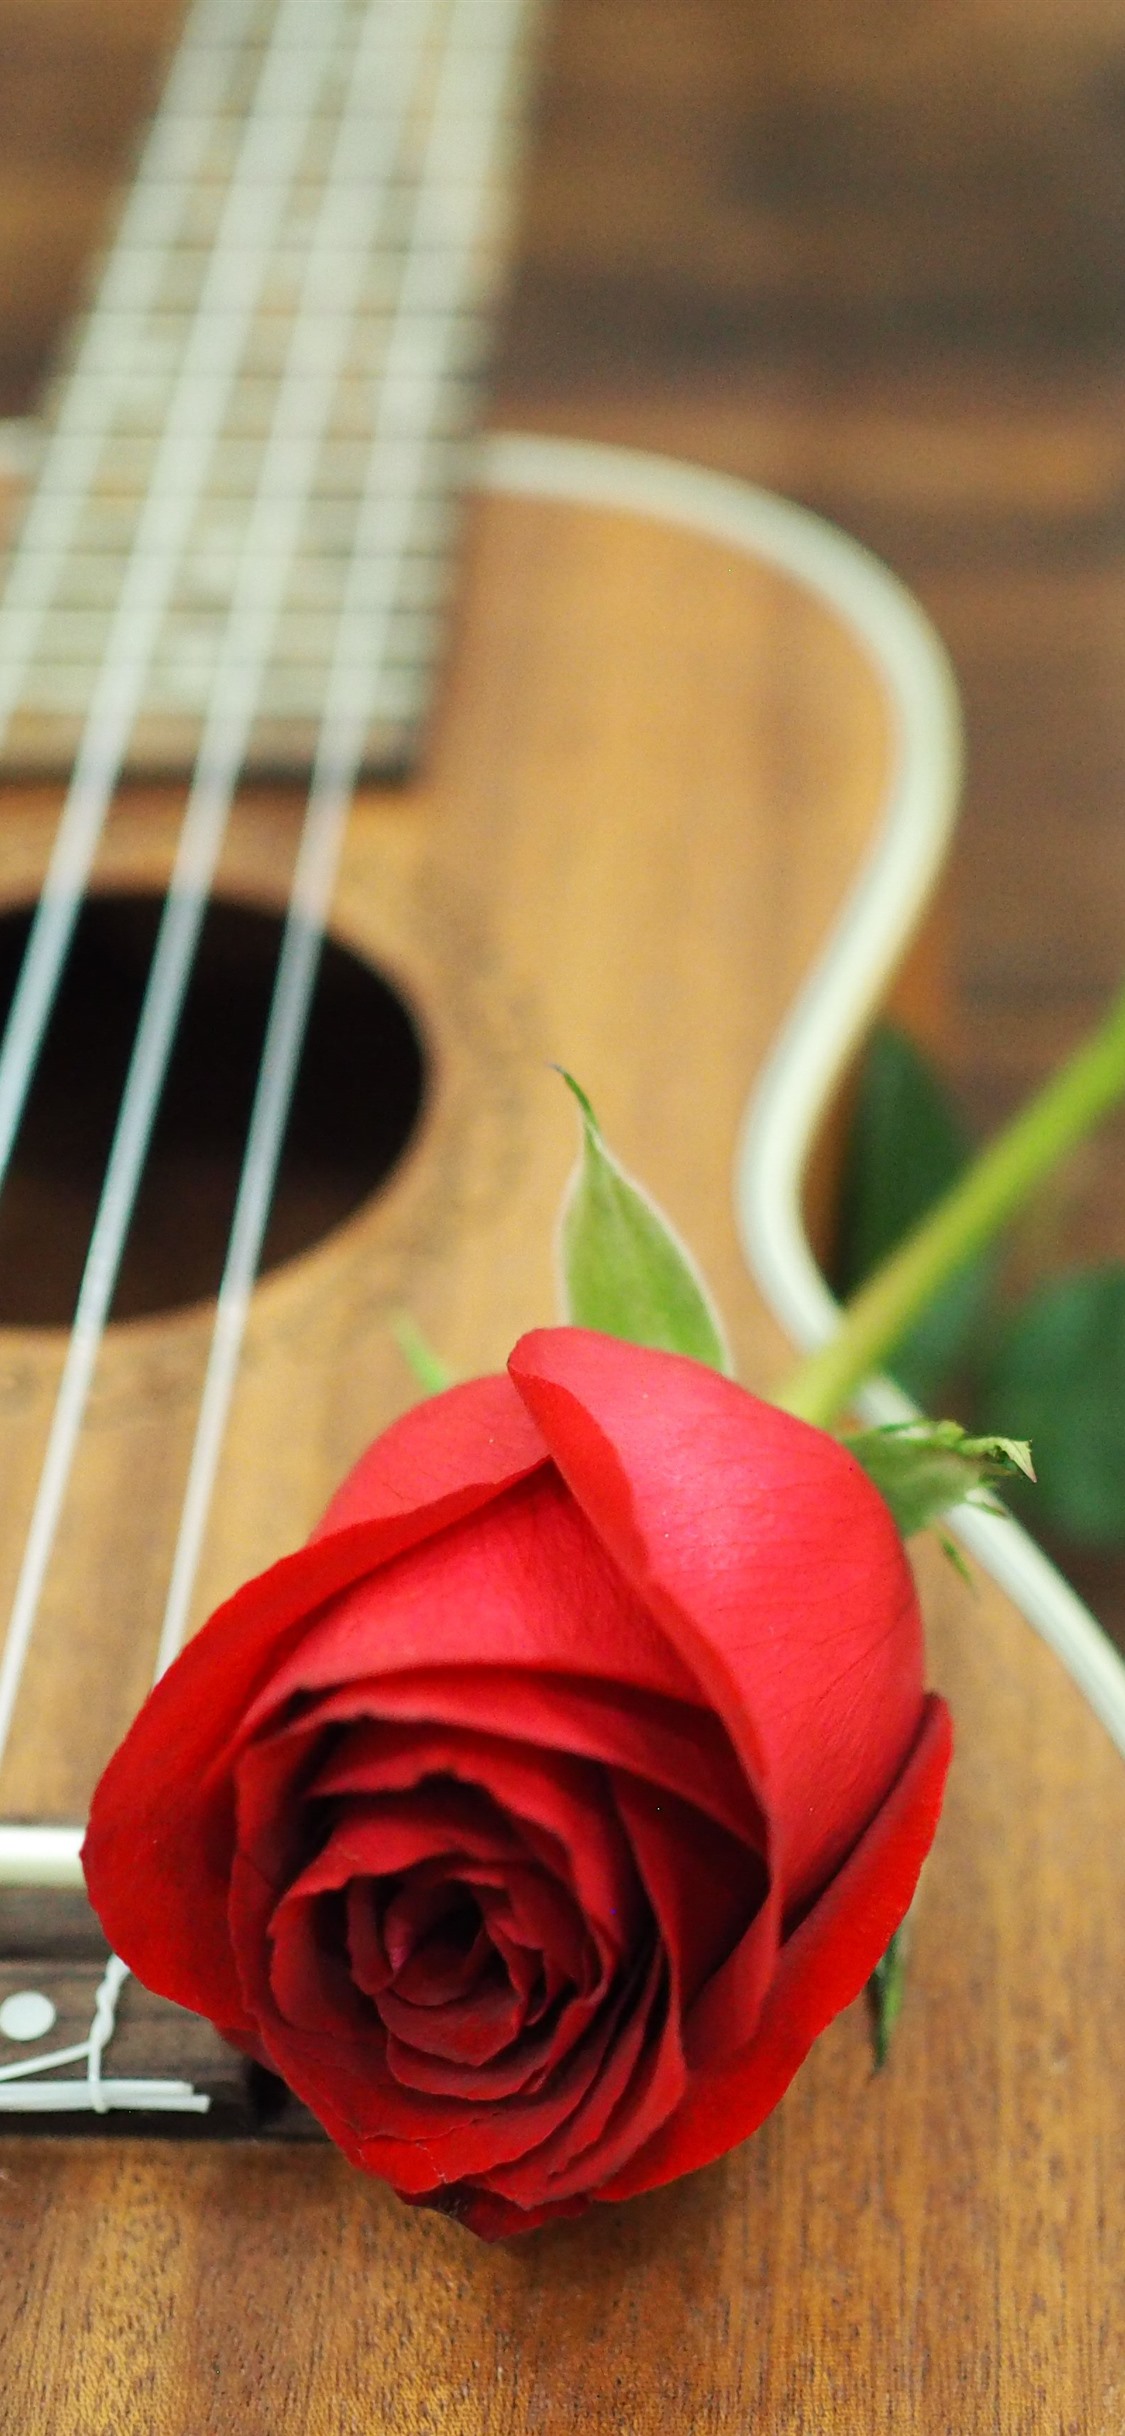 Red Rose, Guitar 1242x2688 IPhone 11 Pro XS Max Wallpaper, Background, Picture, Image